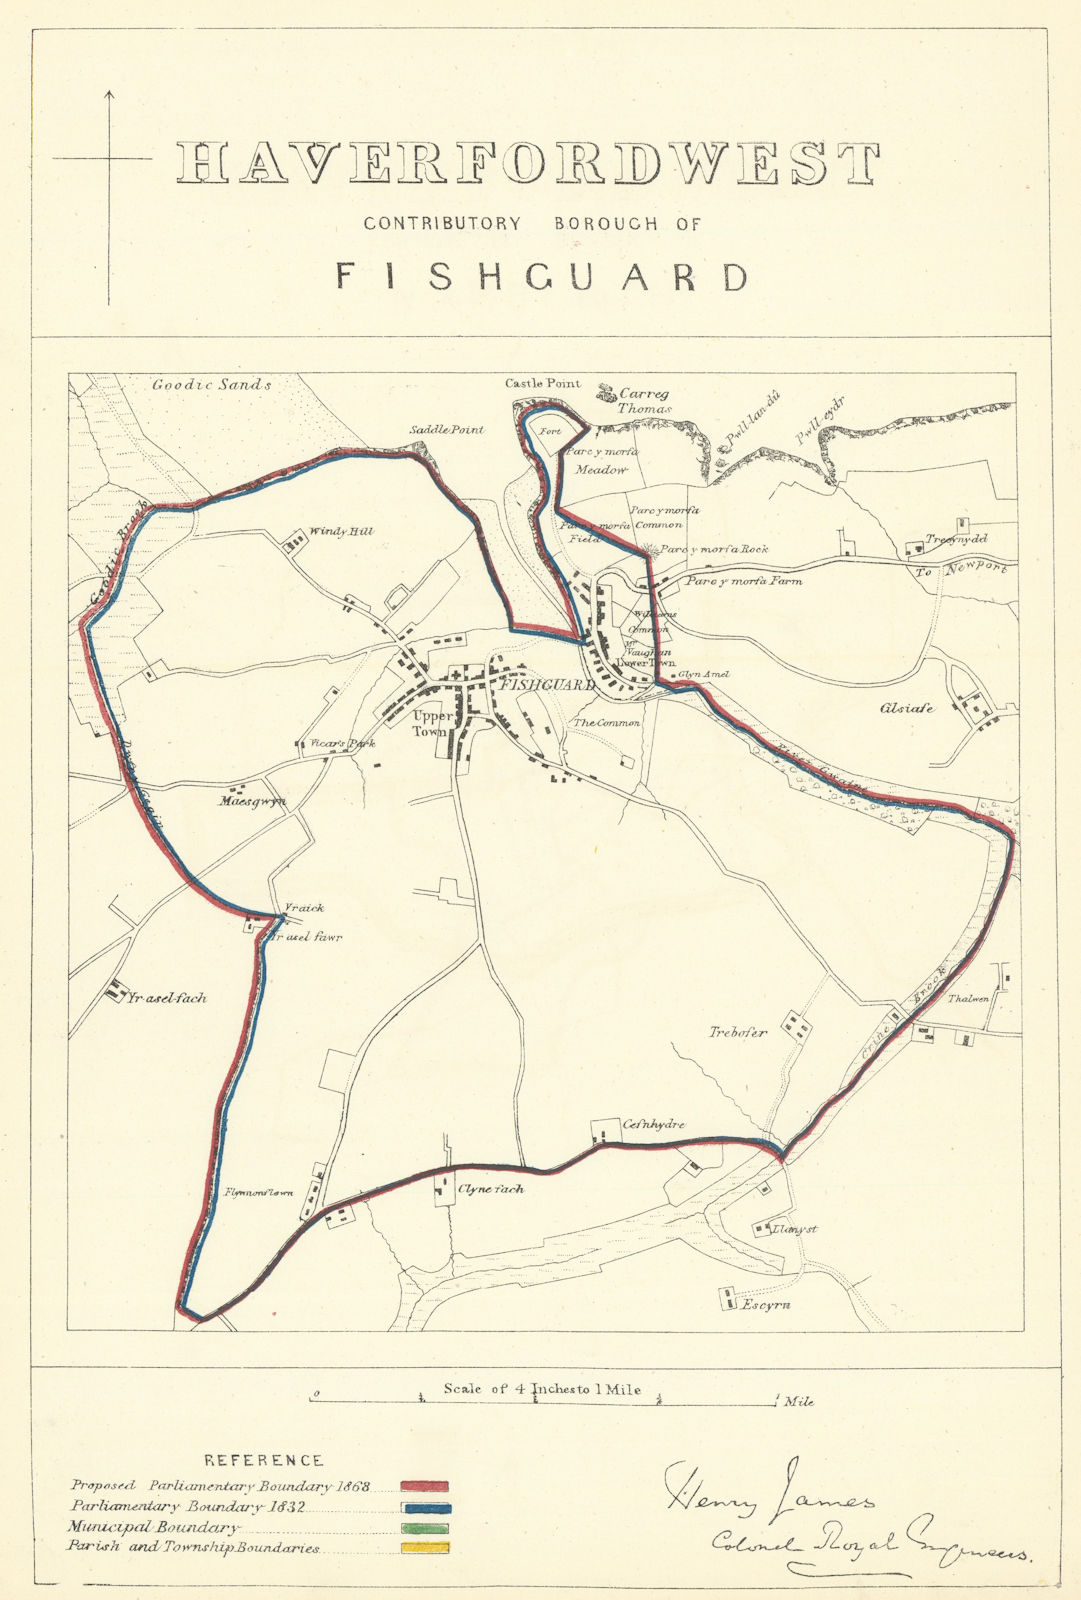 Associate Product Haverfordwest Contrib'y Borough of Fishguard. JAMES Boundary Commission 1868 map